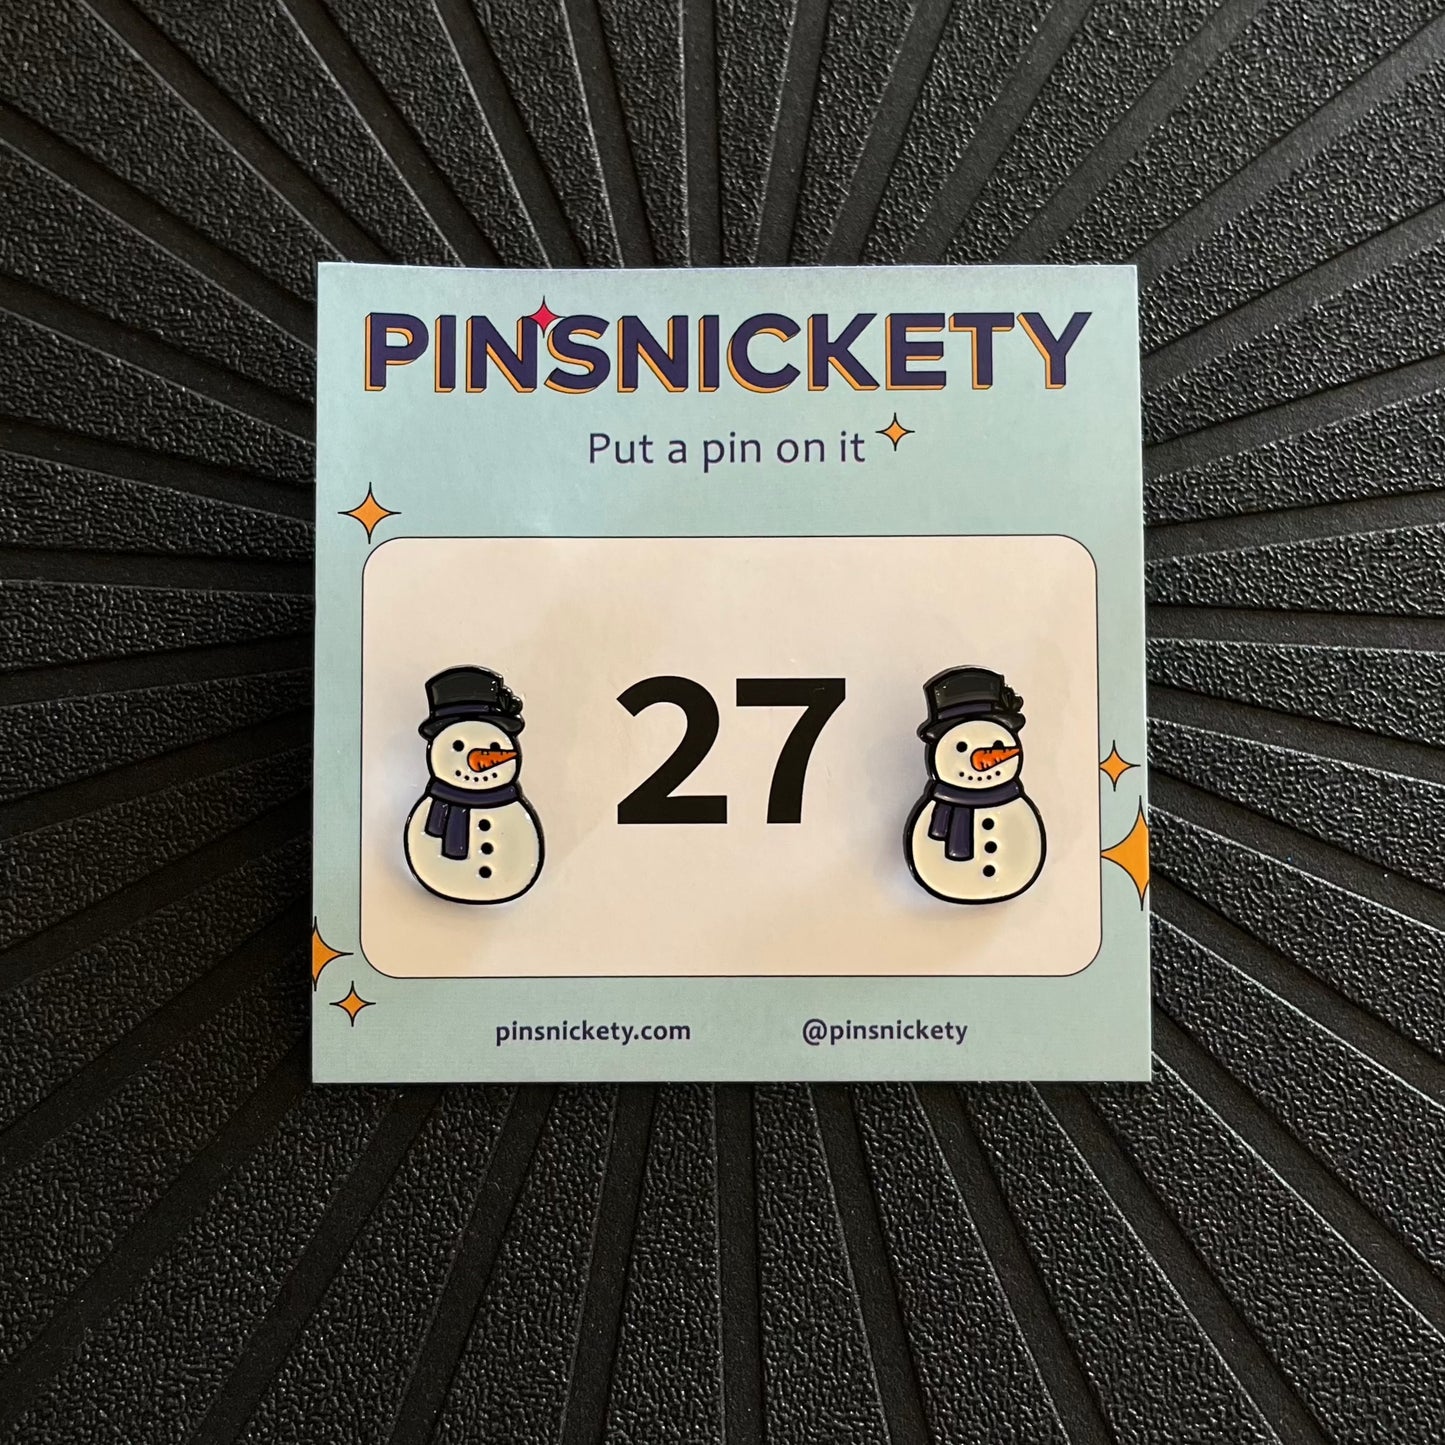 pinsnickety snowman horse show number pins on a black background